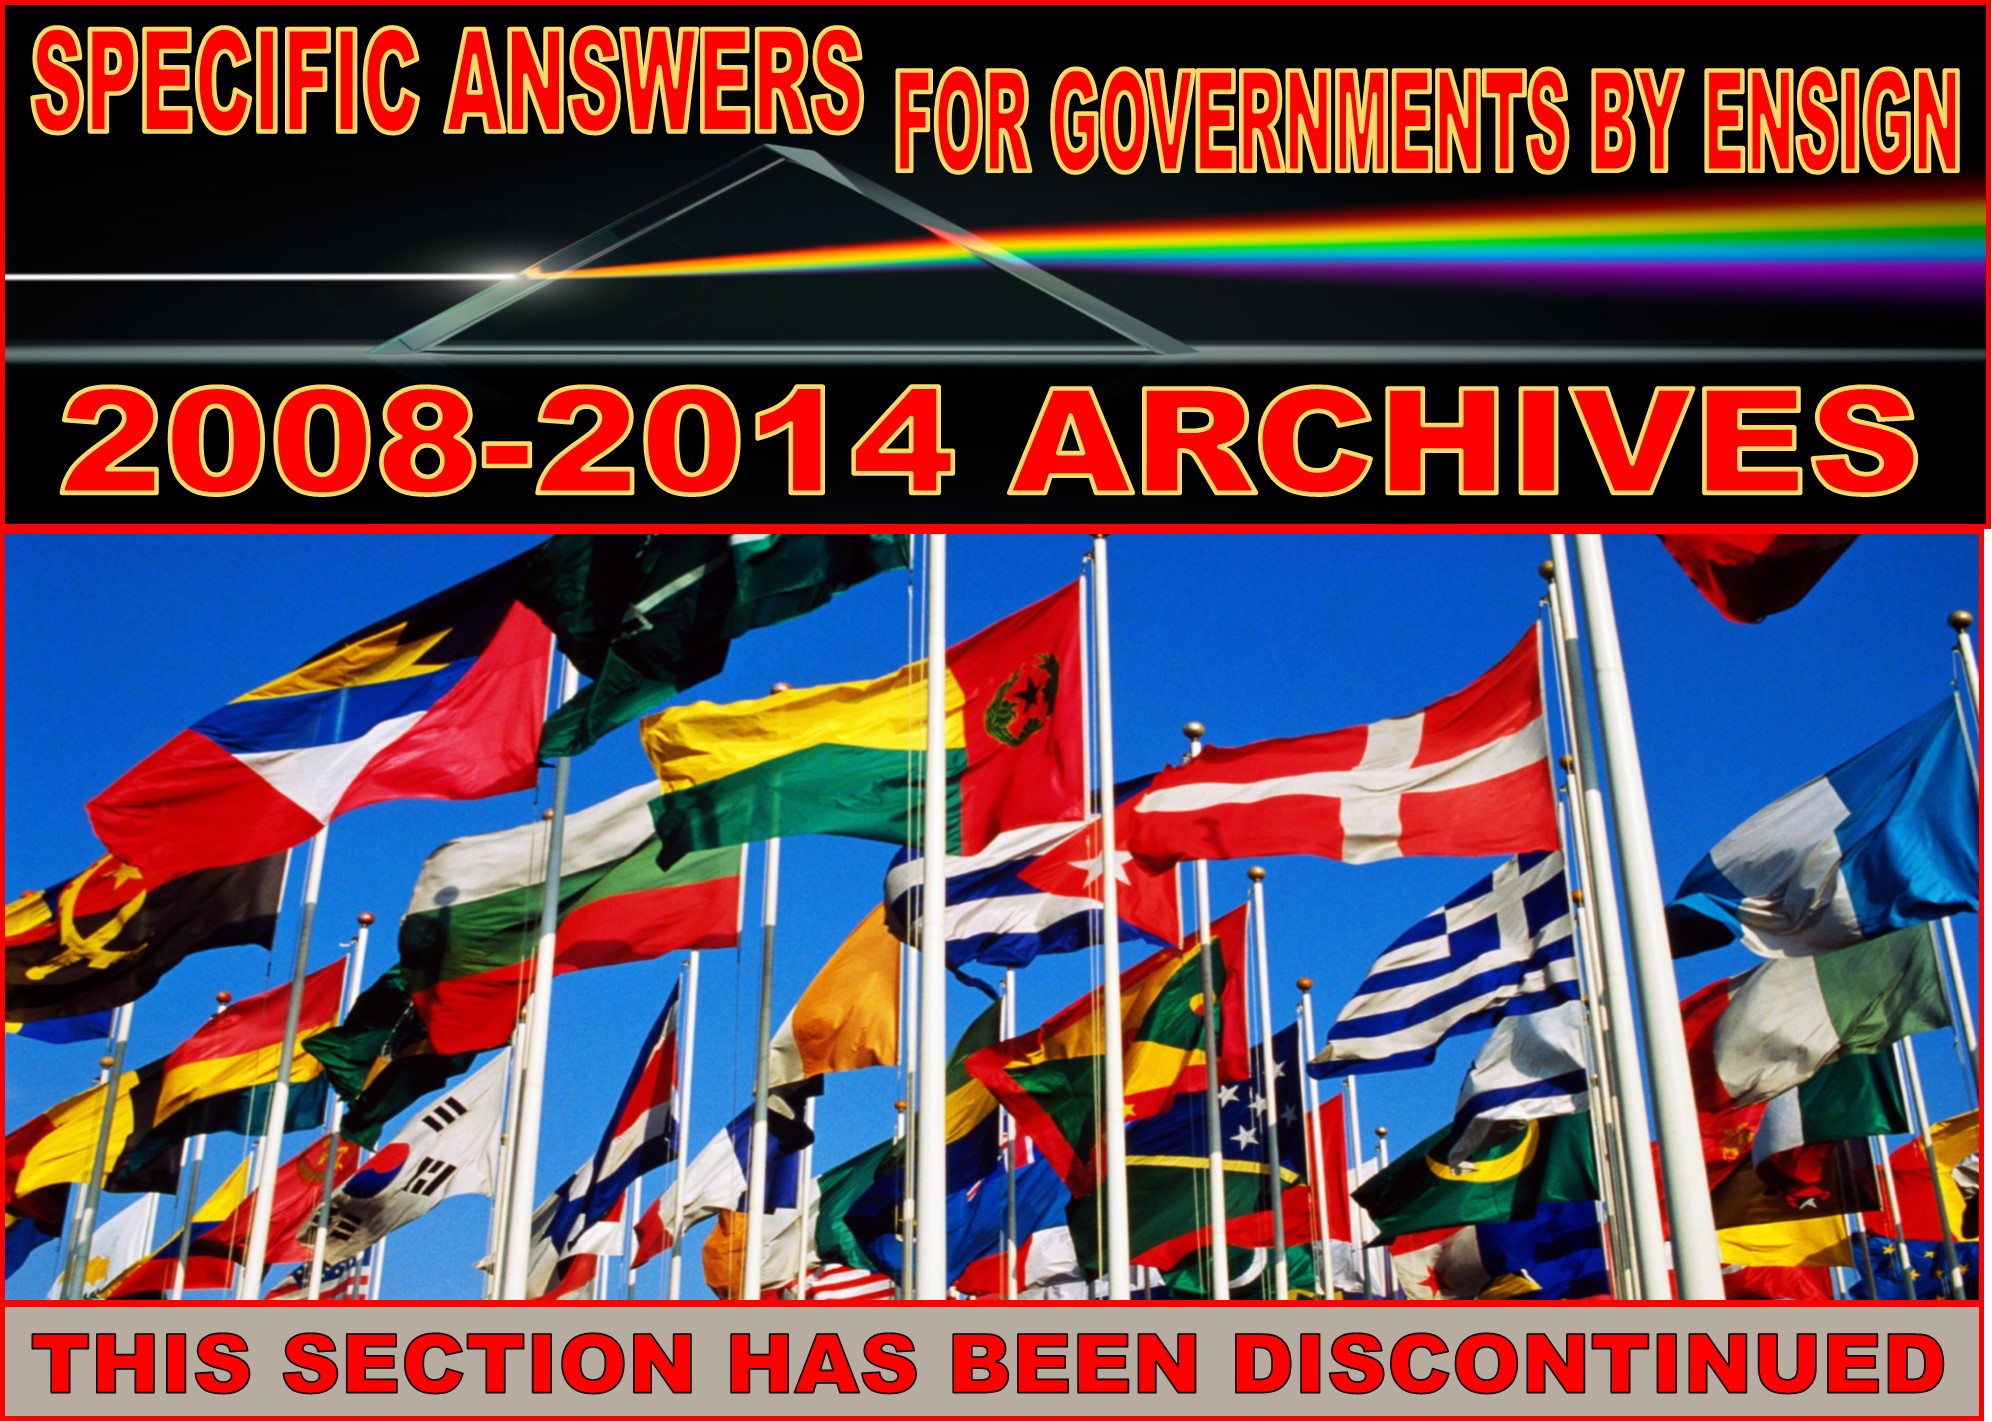 SPECIFIC ANSWERS FOR GOVERNMENTS BY ENSIGN 2008-2014 ARCHIVES HEADER LOGO 5-20-2021